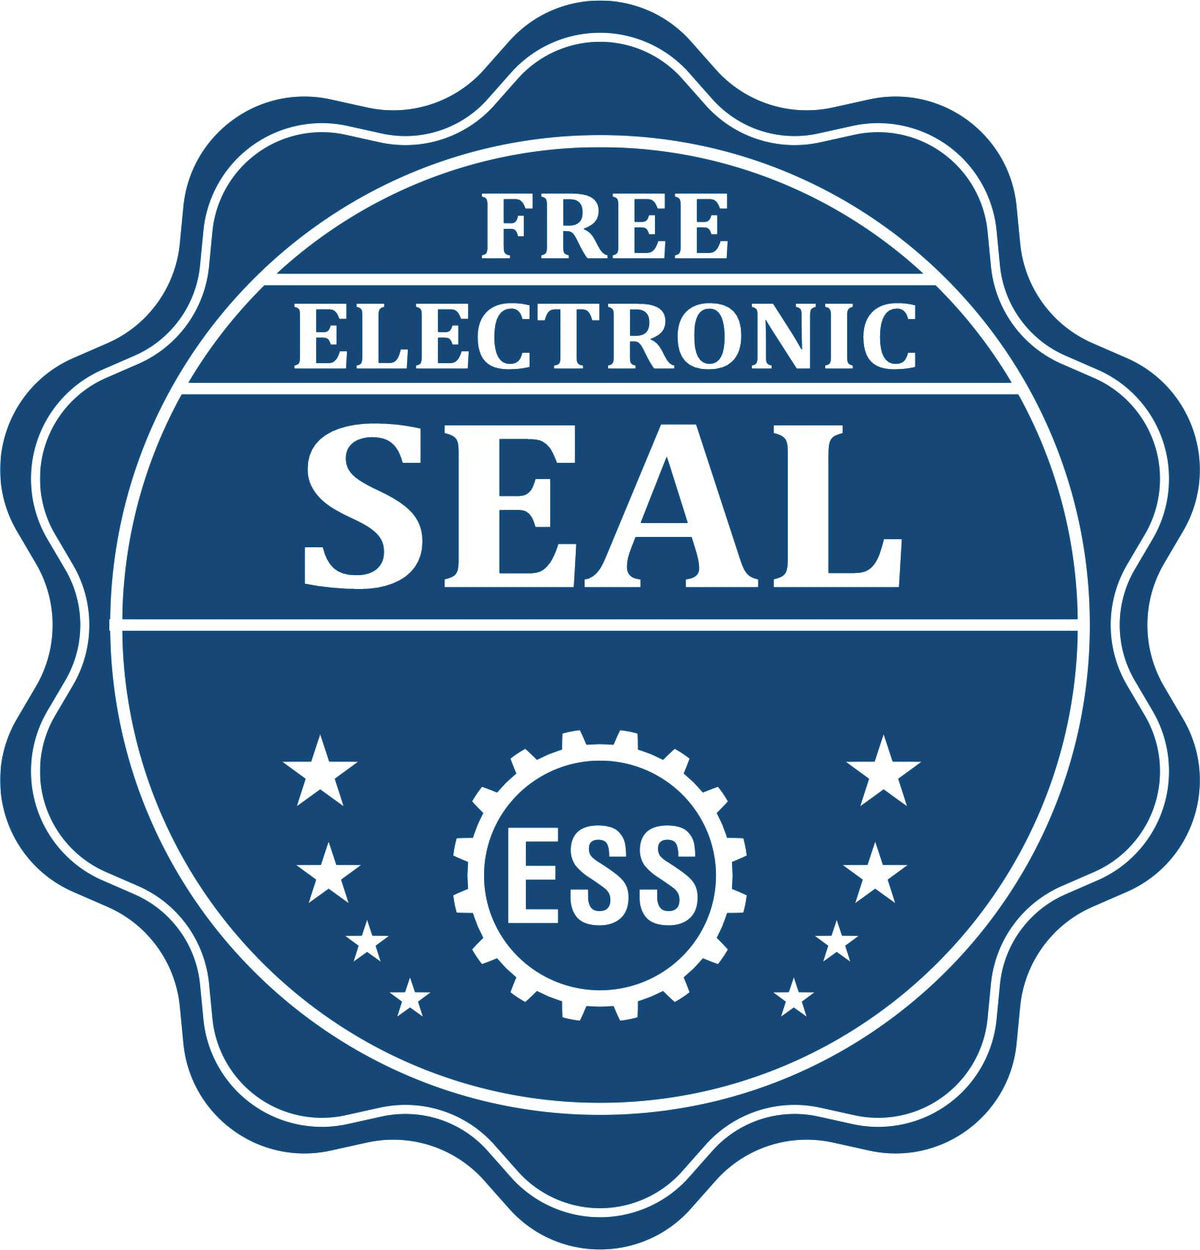 A badge showing a free electronic seal for the Hybrid New York Landscape Architect Seal with stars and the ESS gear on the emblem.